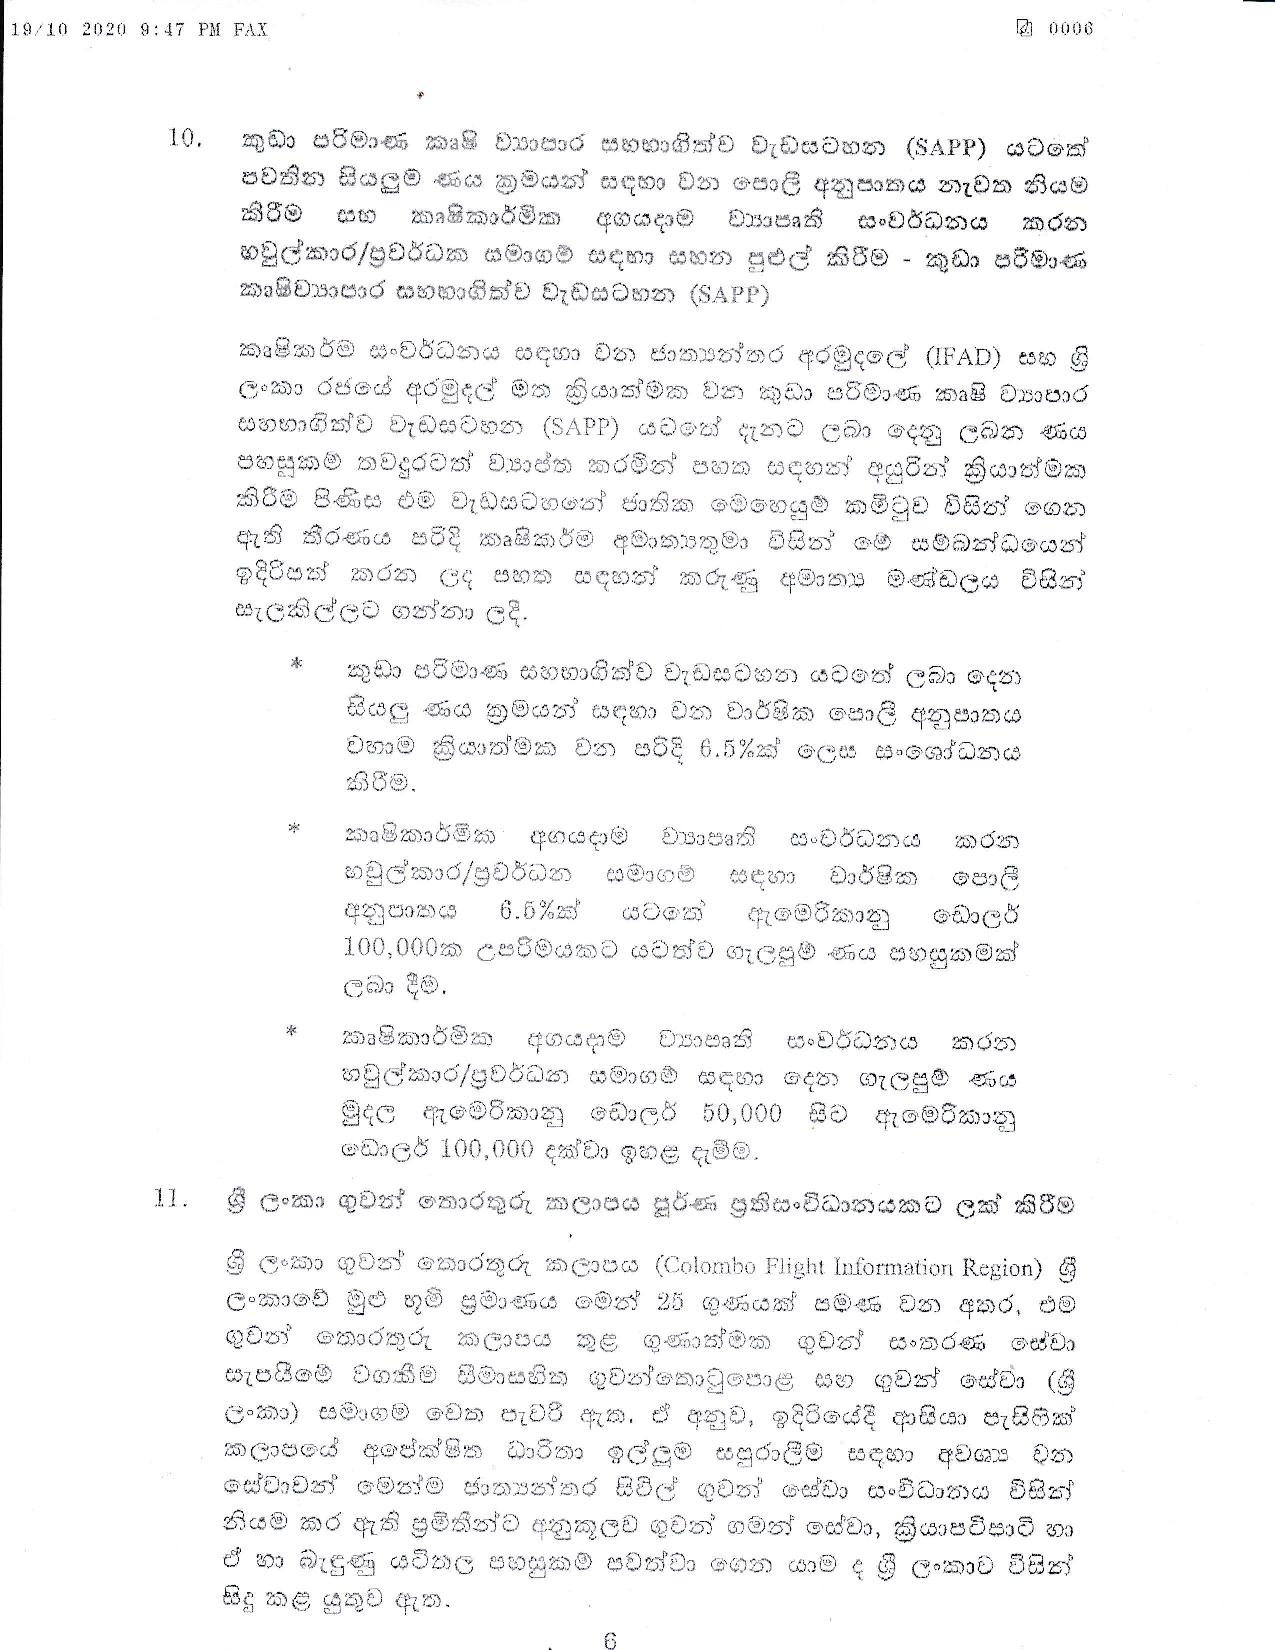 Cabinet Decision on 19.10.2020 page 006